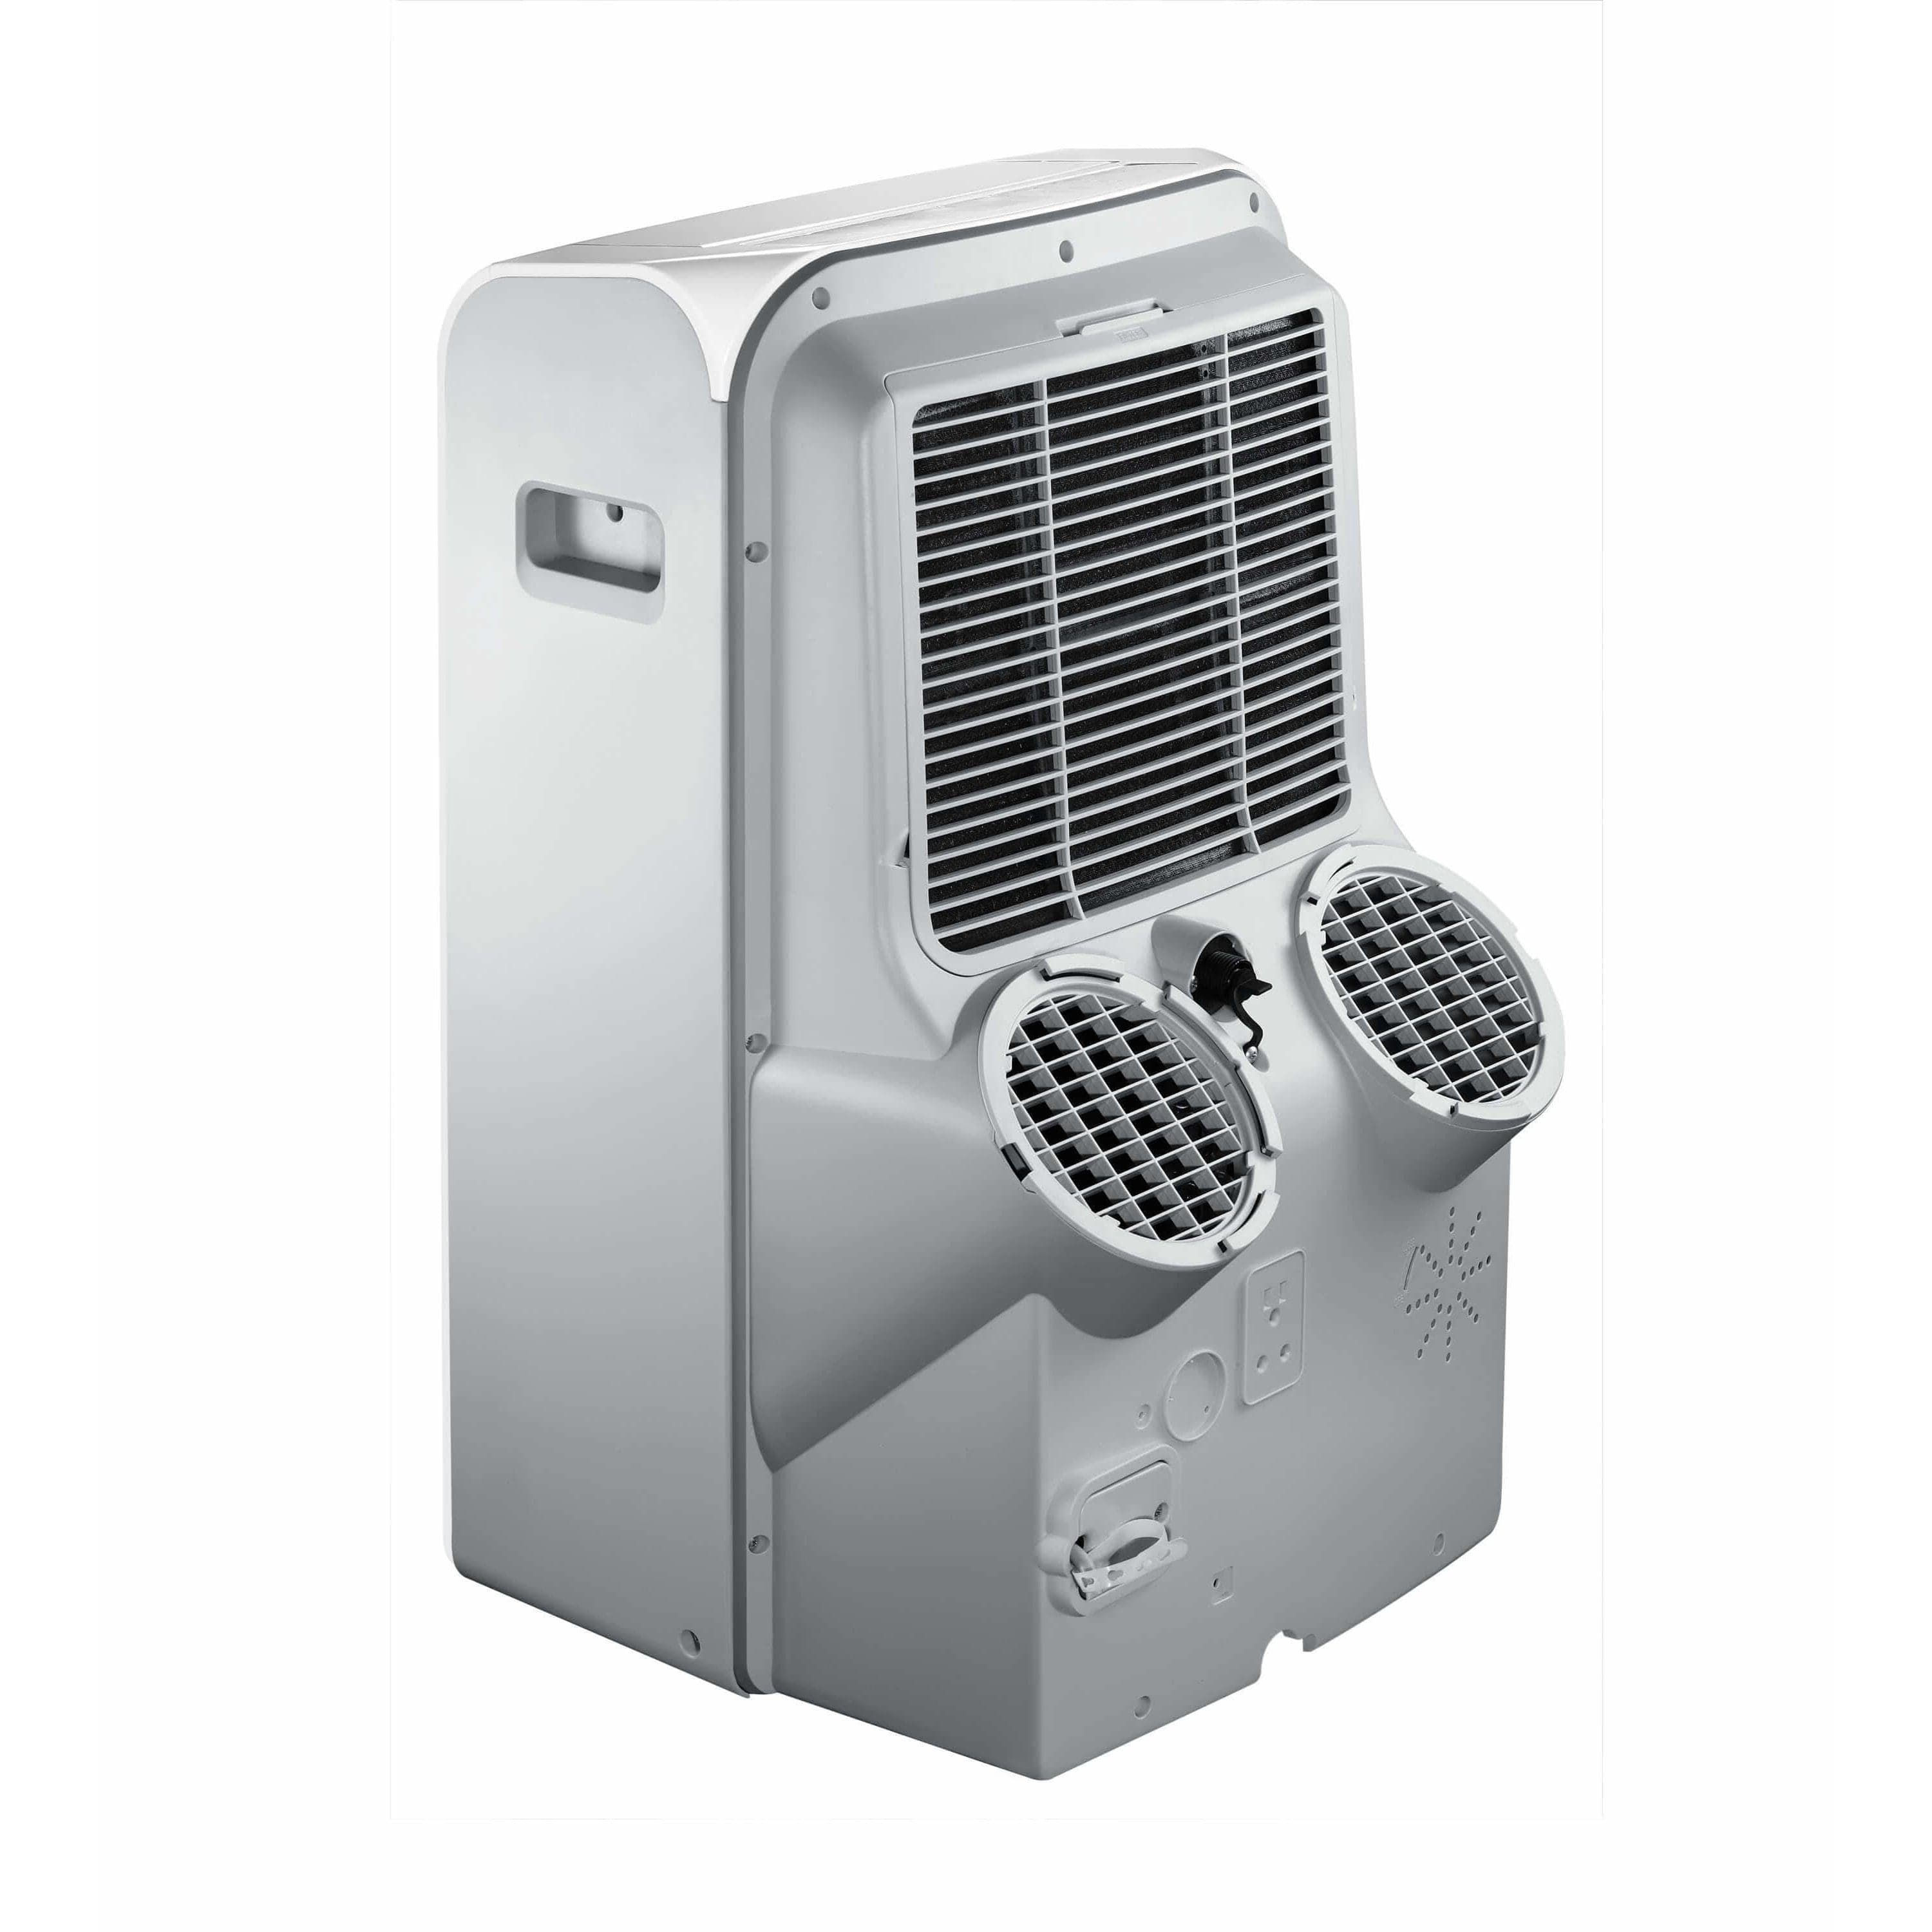 Whynter 12,000 BTU Dual Hose Portable Air Conditioner with 3M and Silvershield filter ARC-126MD Wine Coolers Empire